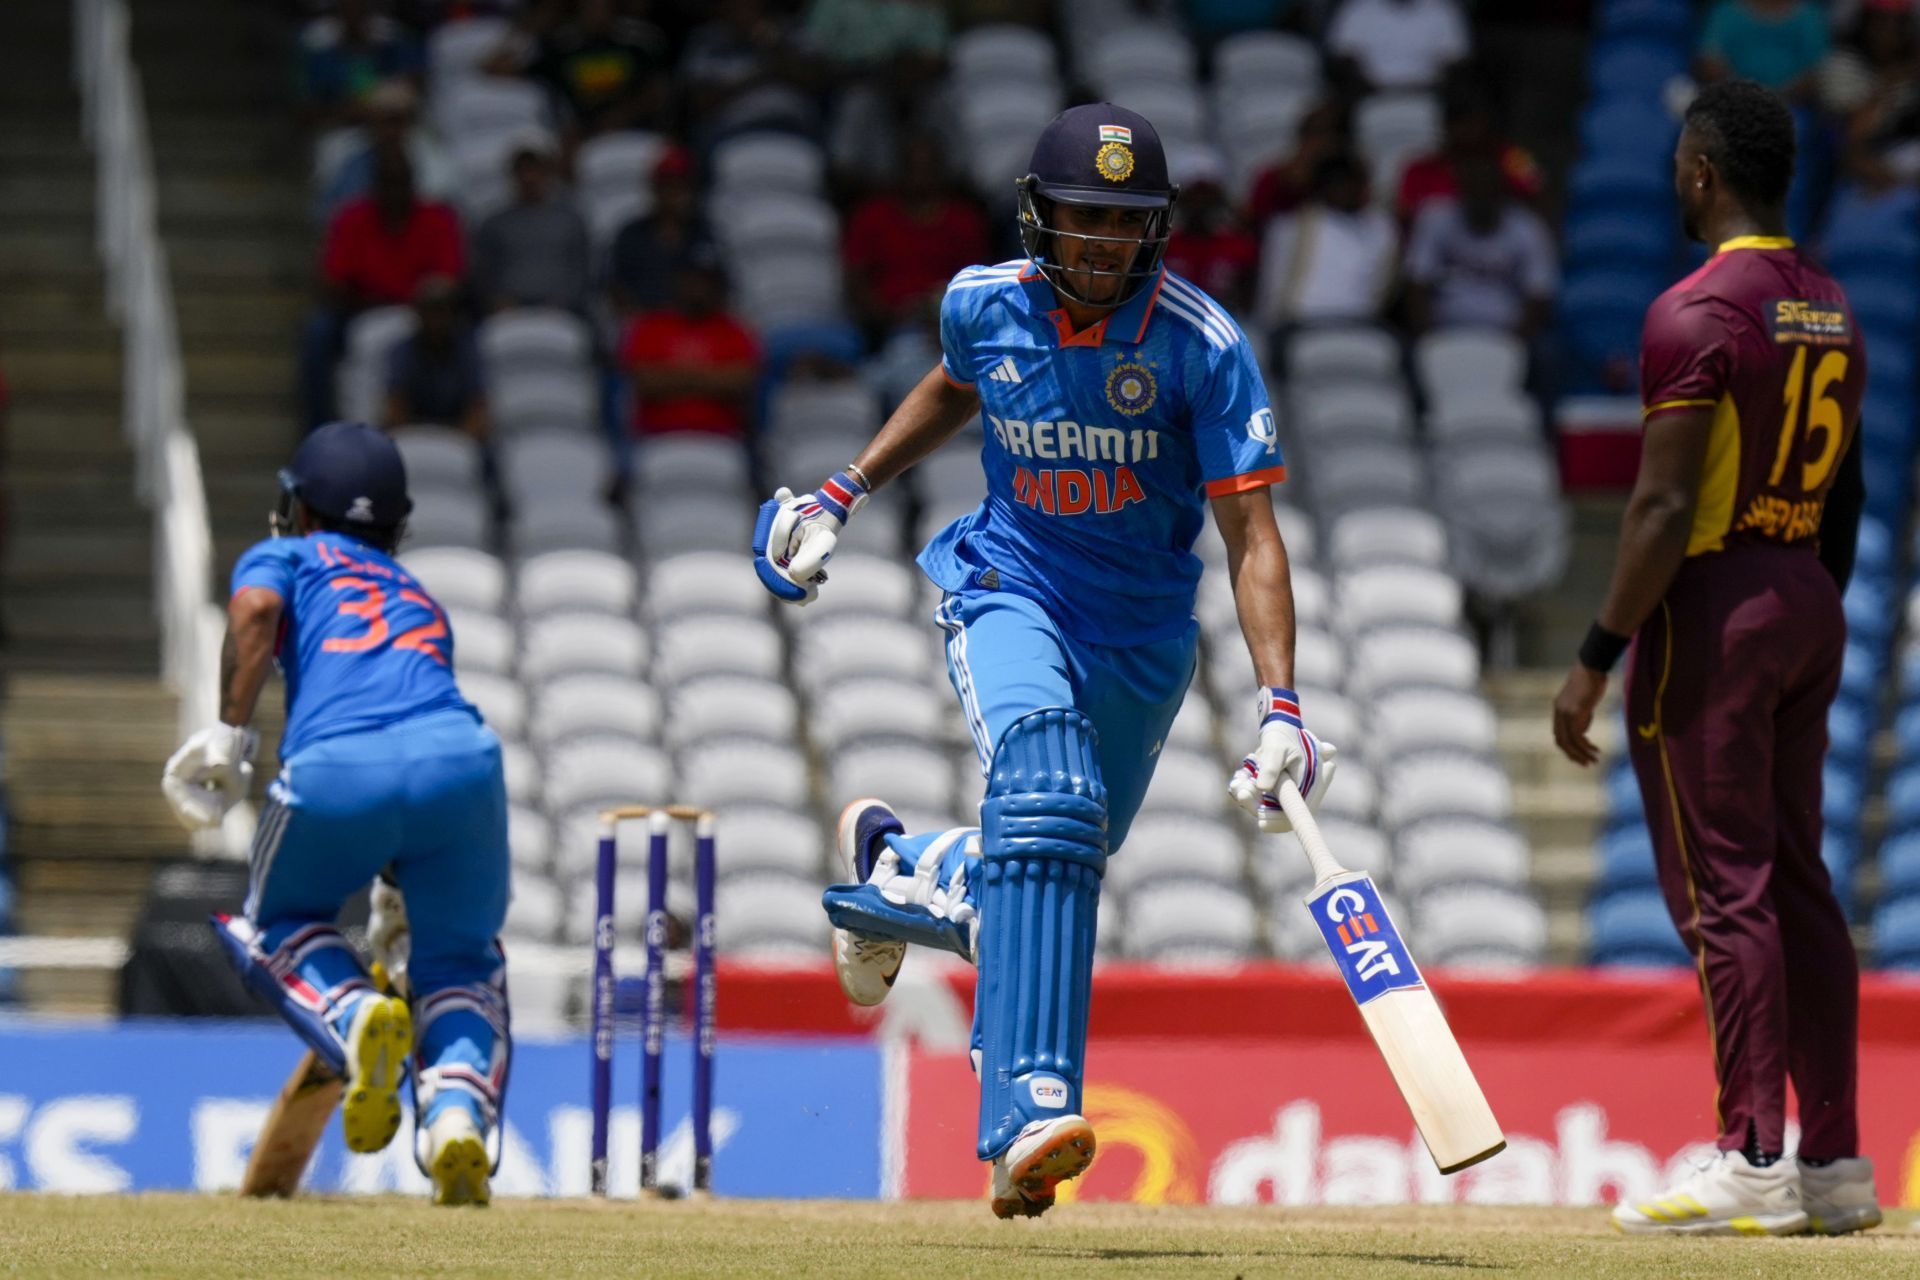 Shubman Gill has racked up three single-digit scores in the India vs West Indies T20Is